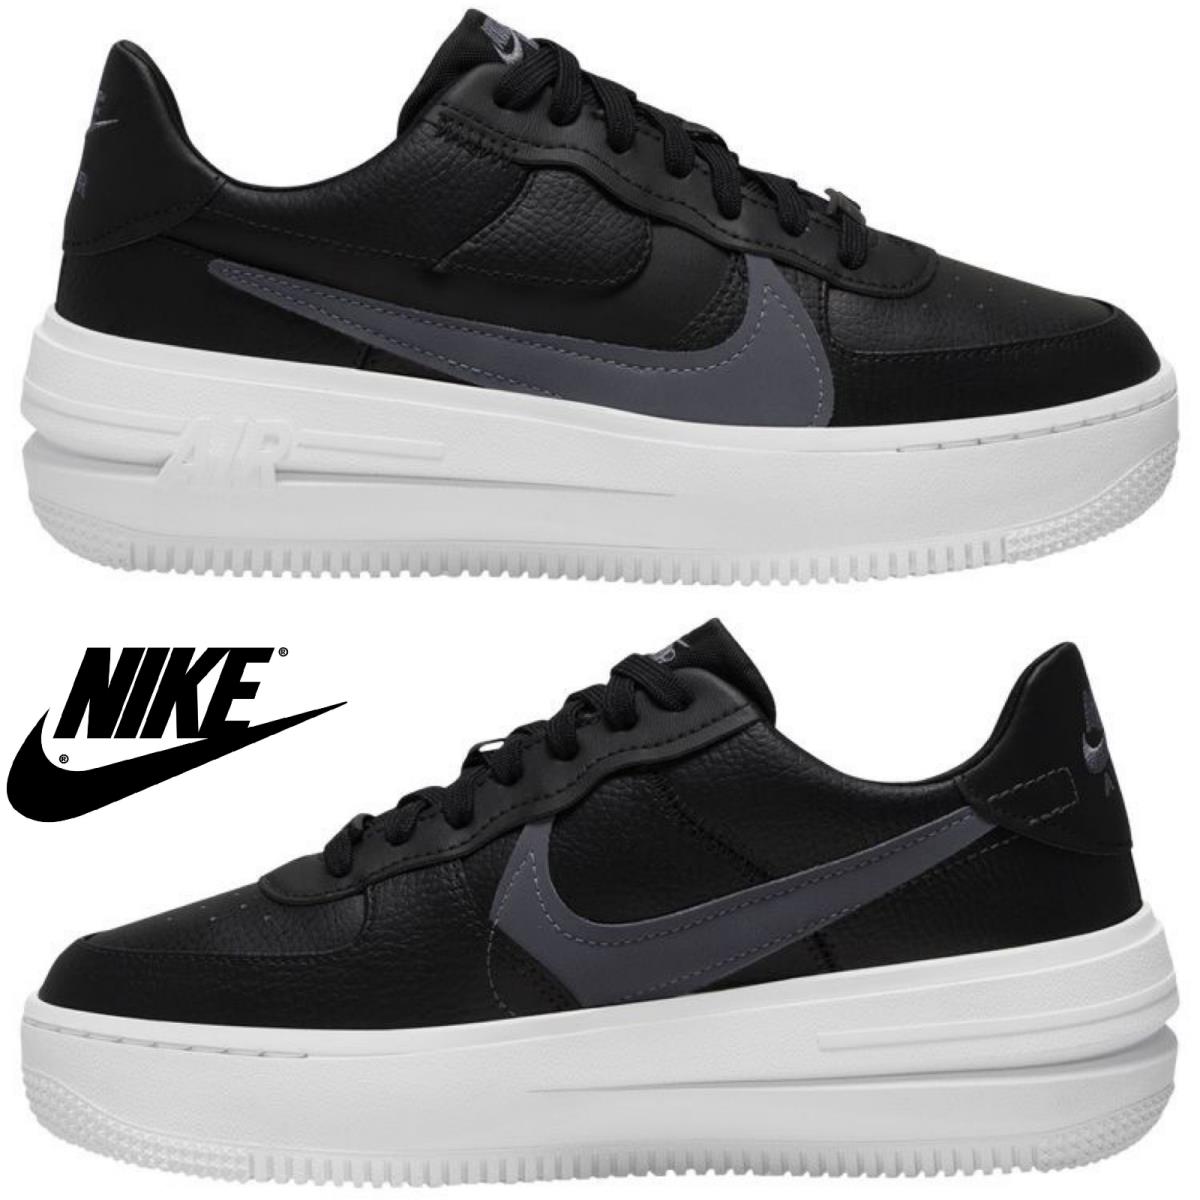 Productiviteit Broer Vervelen Nike Air Force 1 Platform Low Women`s Running Shoes Casual Sneakers Sport  Black | 883212762054 - Nike shoes Air Force - Beige ,  Black/Anthracite/White Manufacturer | SporTipTop